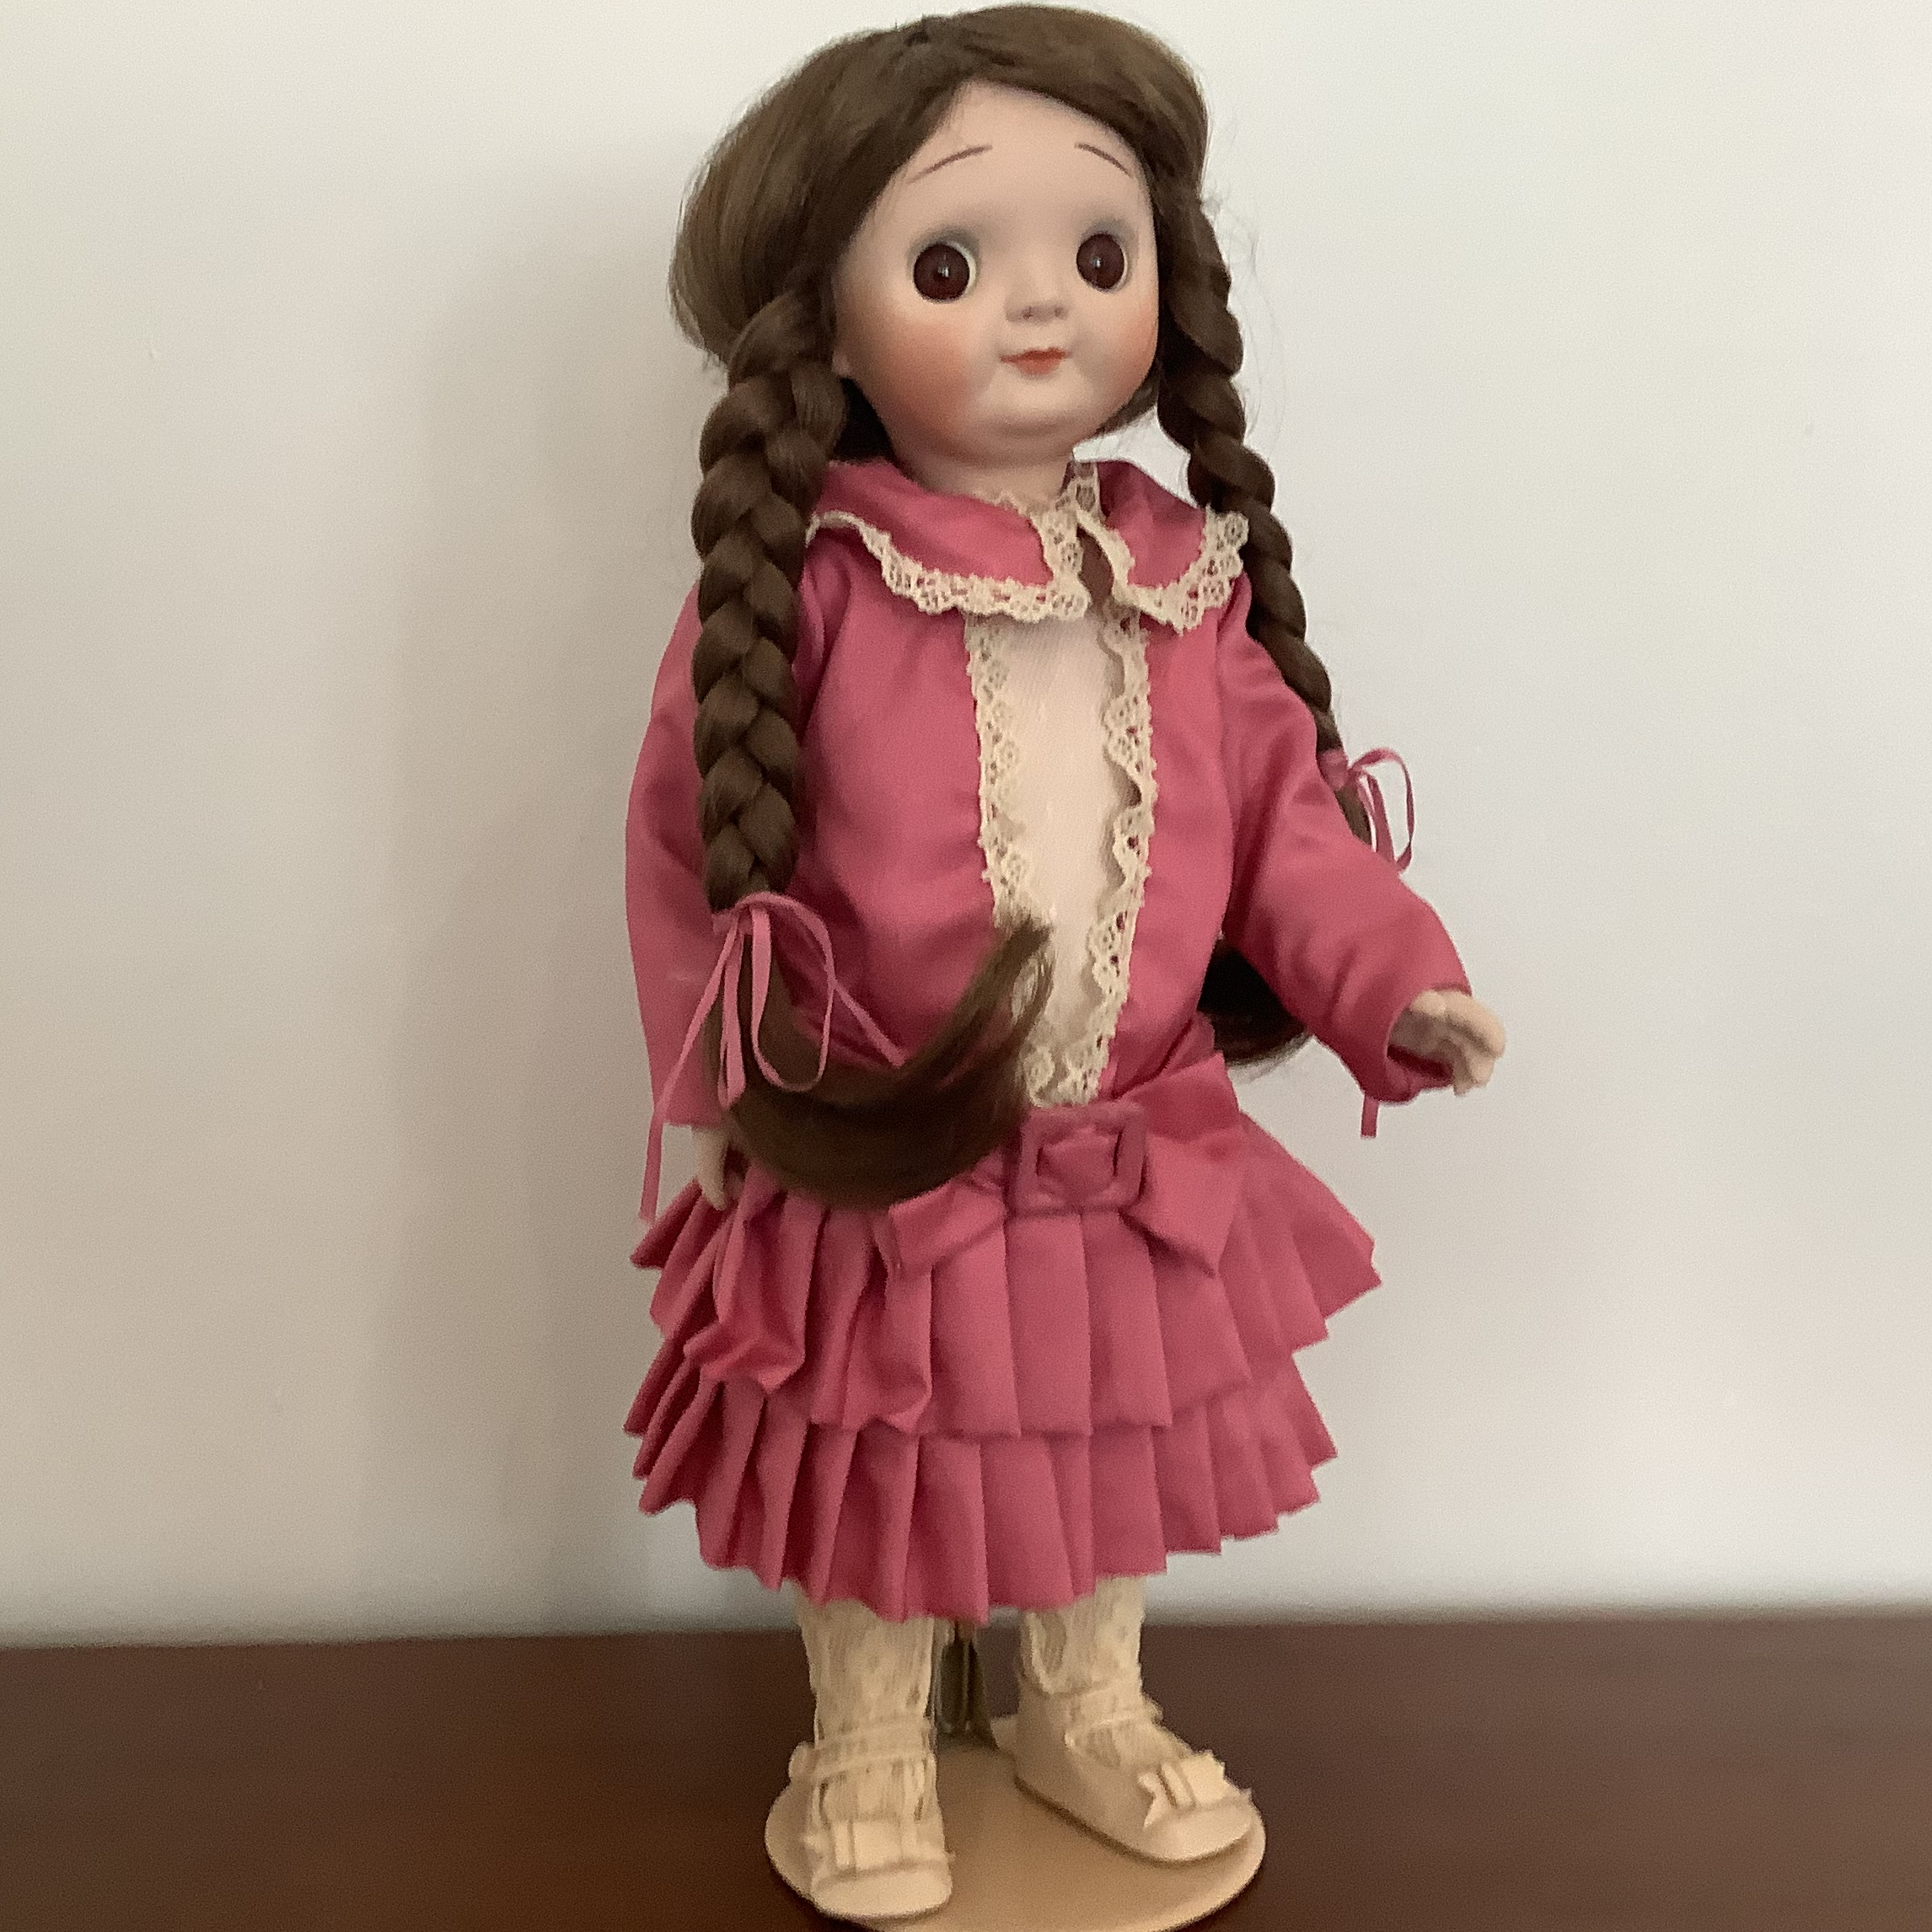 Reproduction Googly doll with braided pigtails and pink dress in modern materials, front view